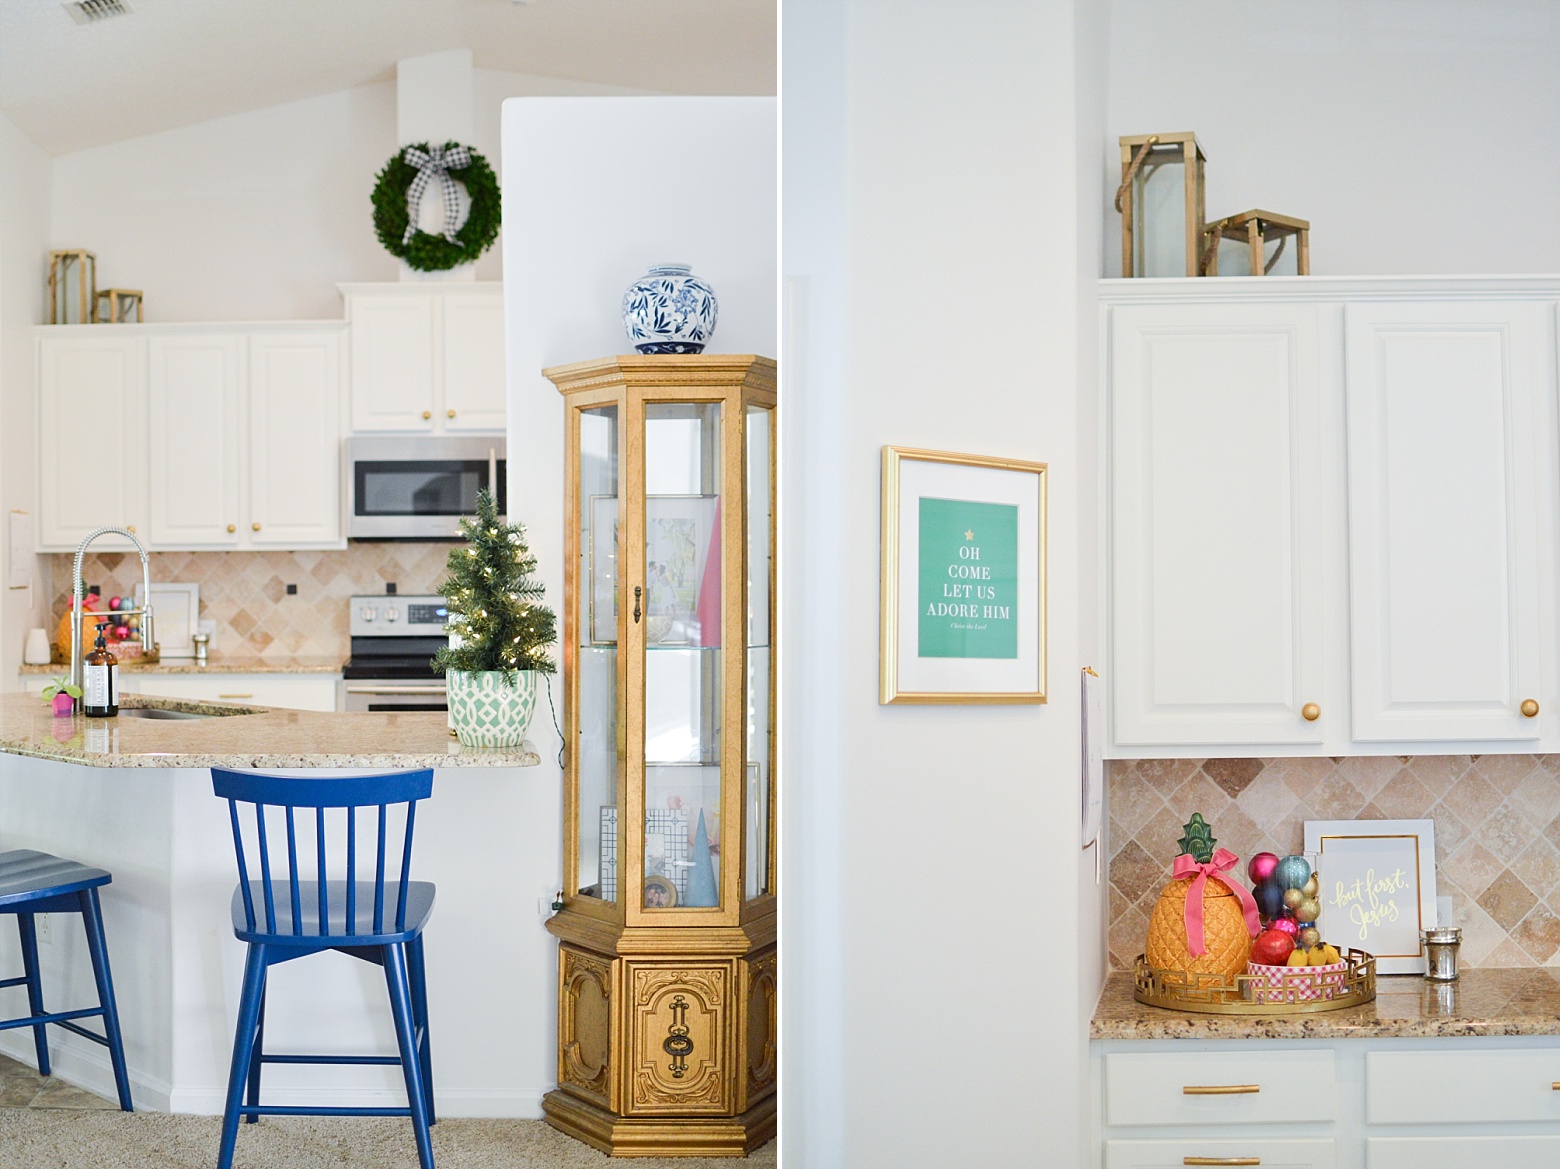 Modern Colorful Christmas Home Tour on Megan Martin Creative, kitchen holiday decor,boxwood wreath, chinoiserie chic, gold curio, navy barstools